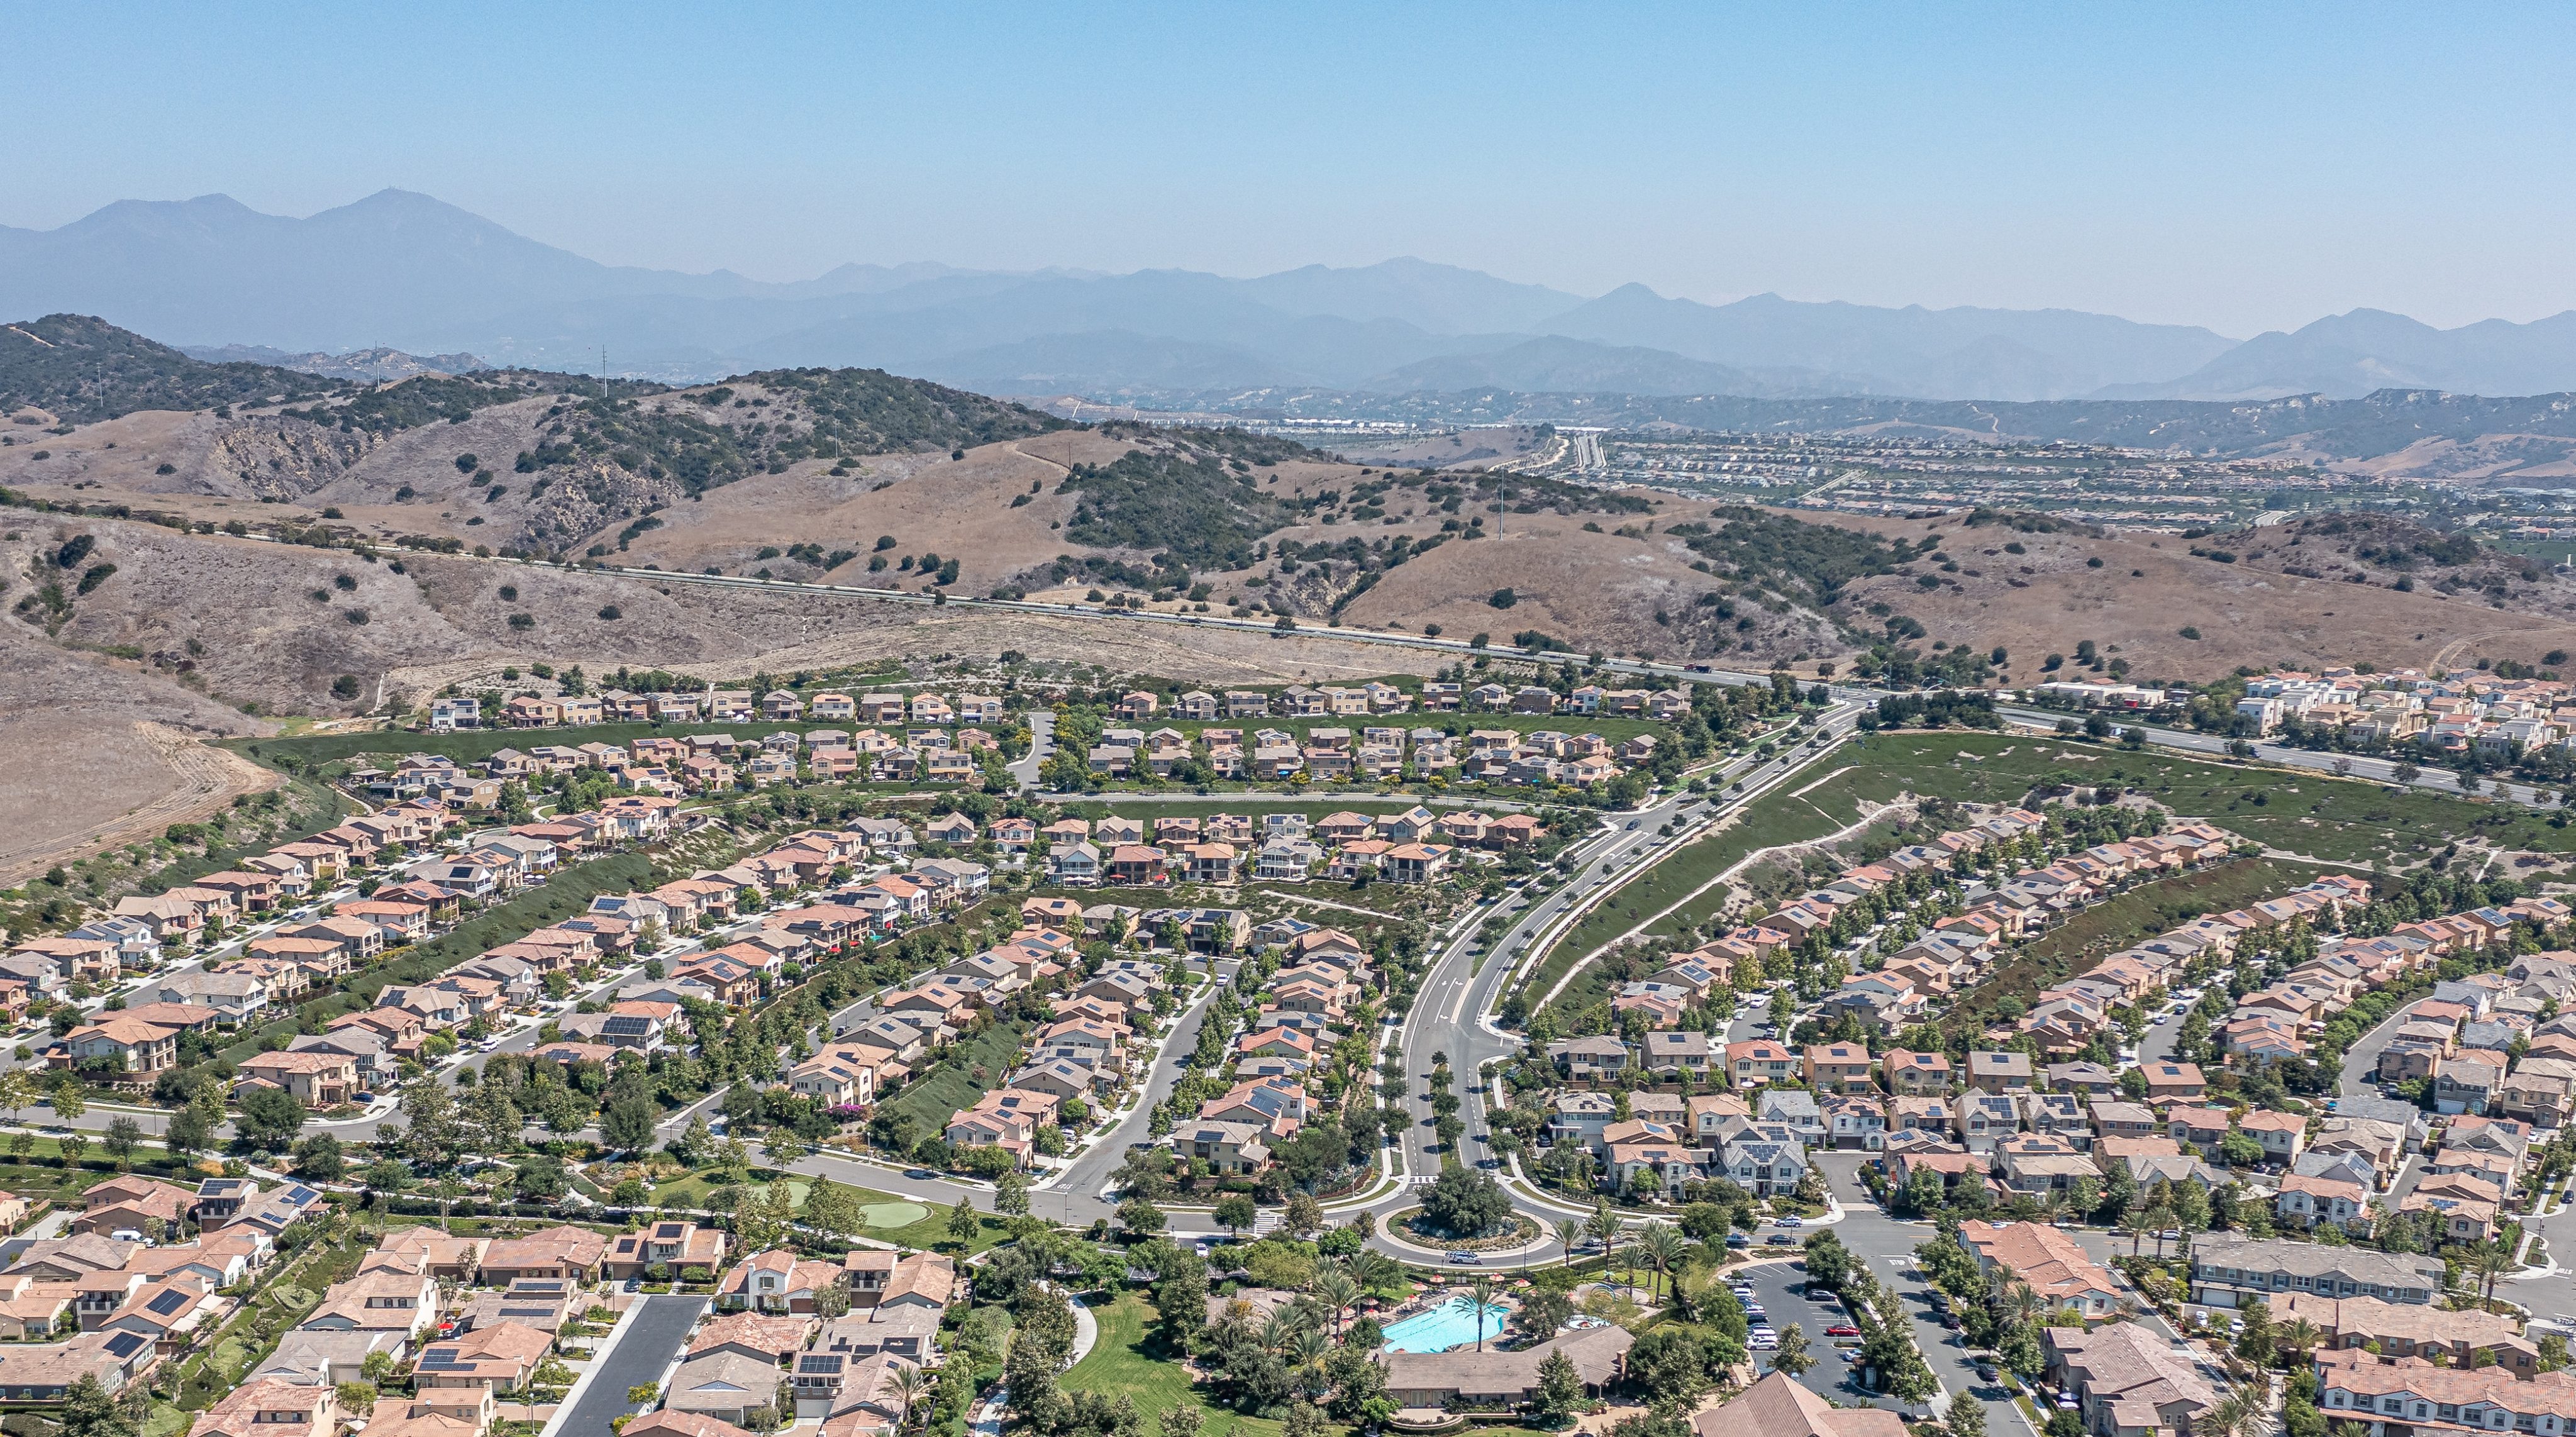 Aerial of a large neighborhood with hills in the background